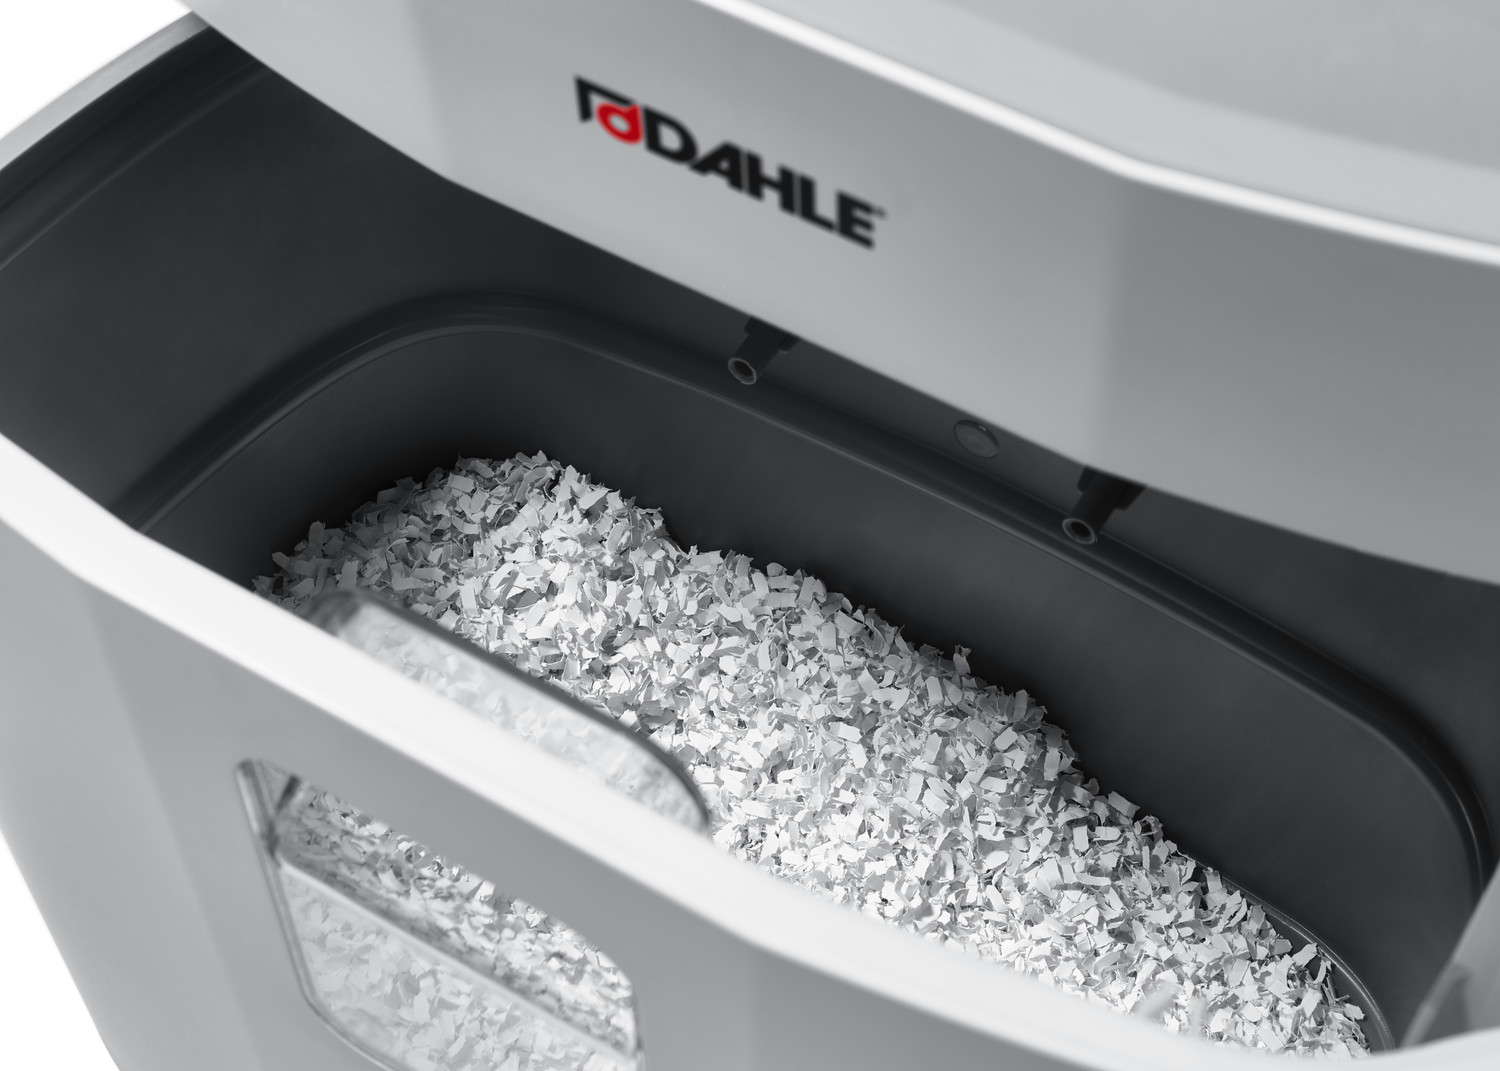 Extra-small particles make optimal use of waste container volume